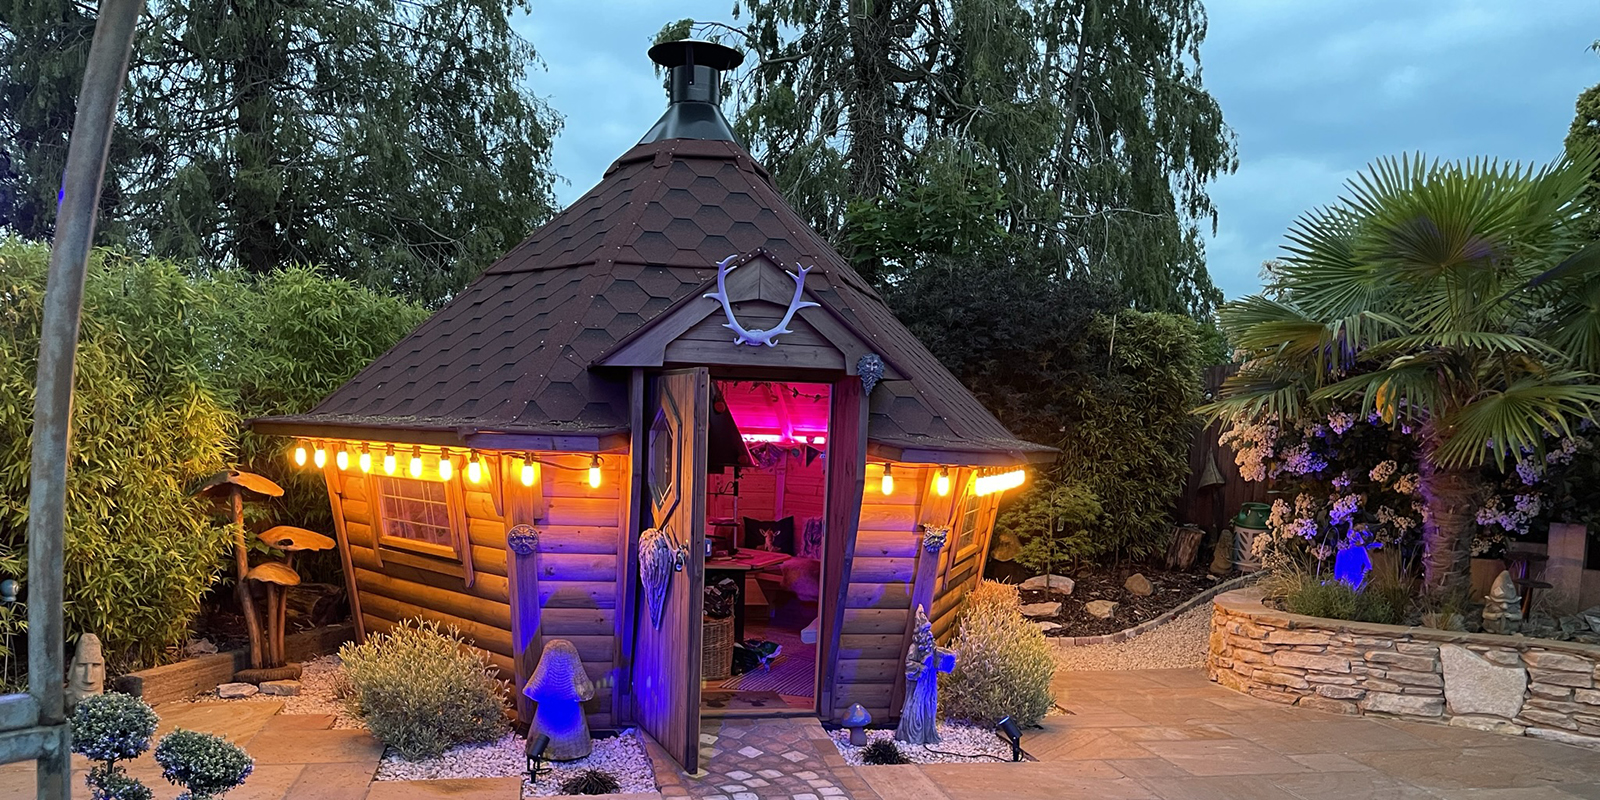 Image of a BBQ hut at dusk with lit up fairy lights